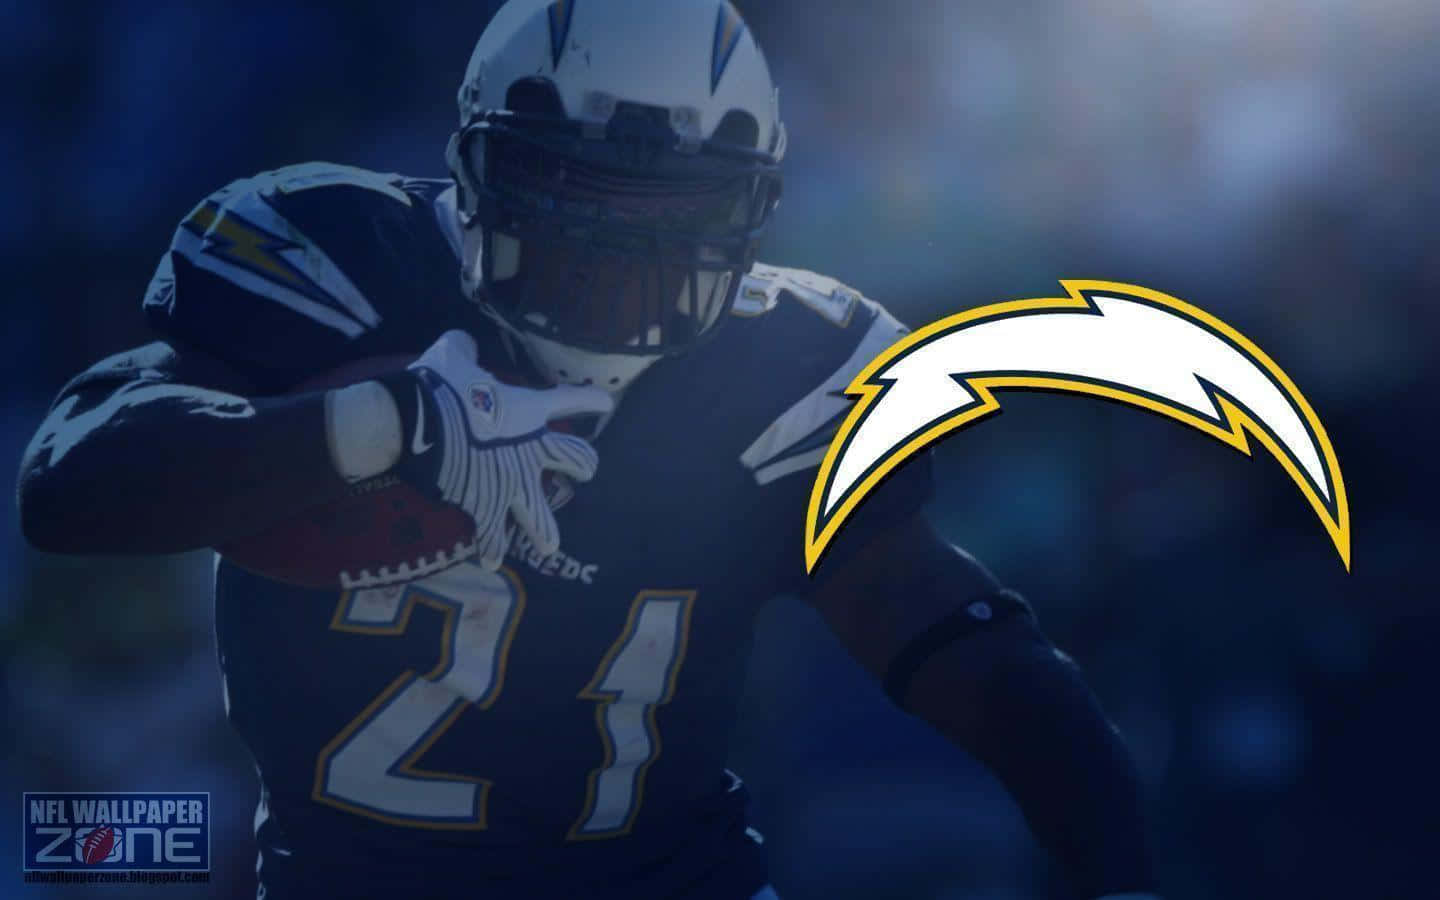 Cheer On the San Diego Chargers in Their Next Big Game! Wallpaper